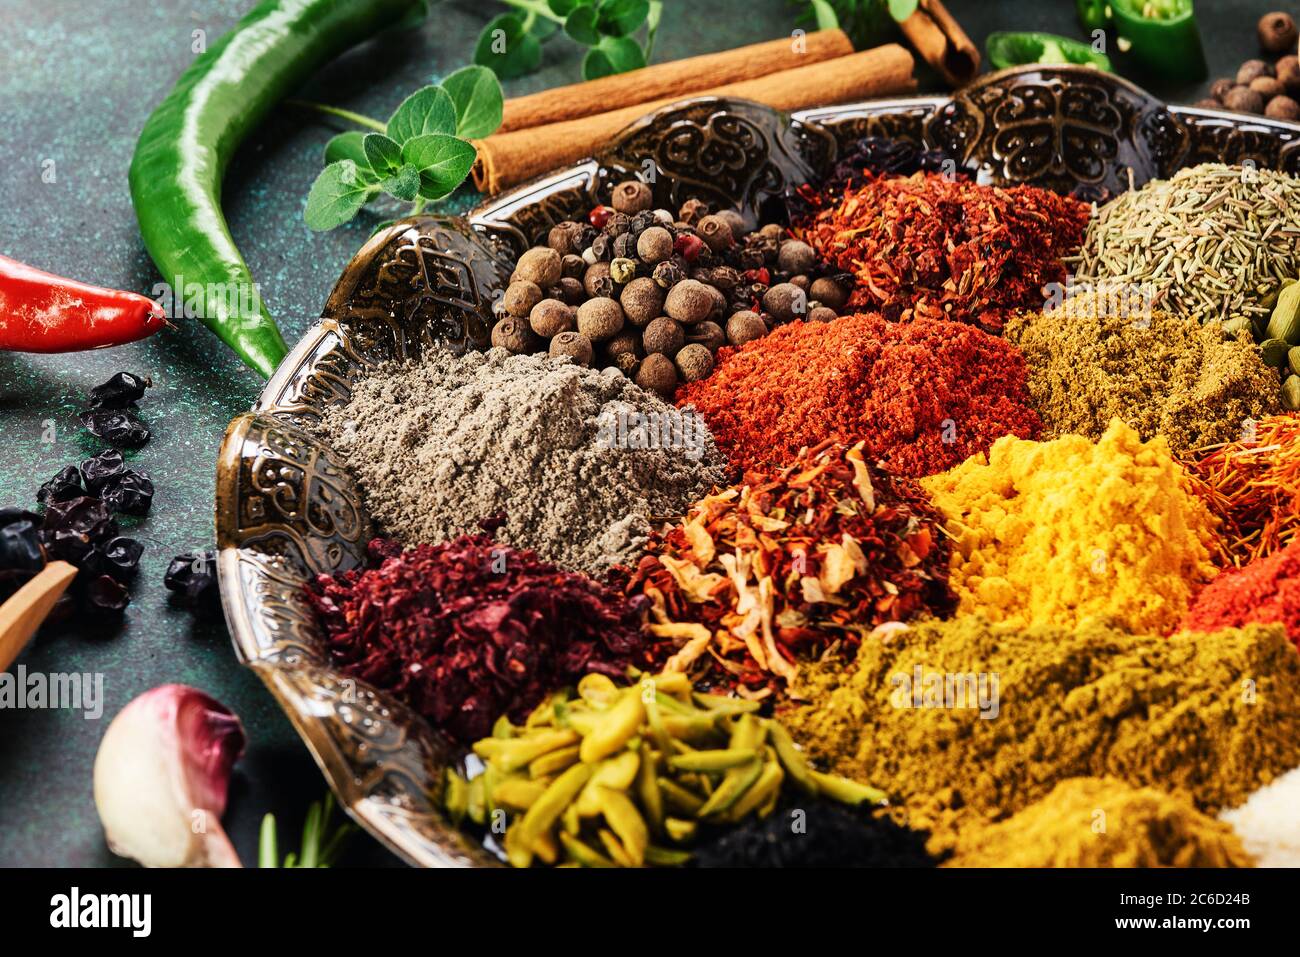 Various spice and dried herbs. Stock Photo